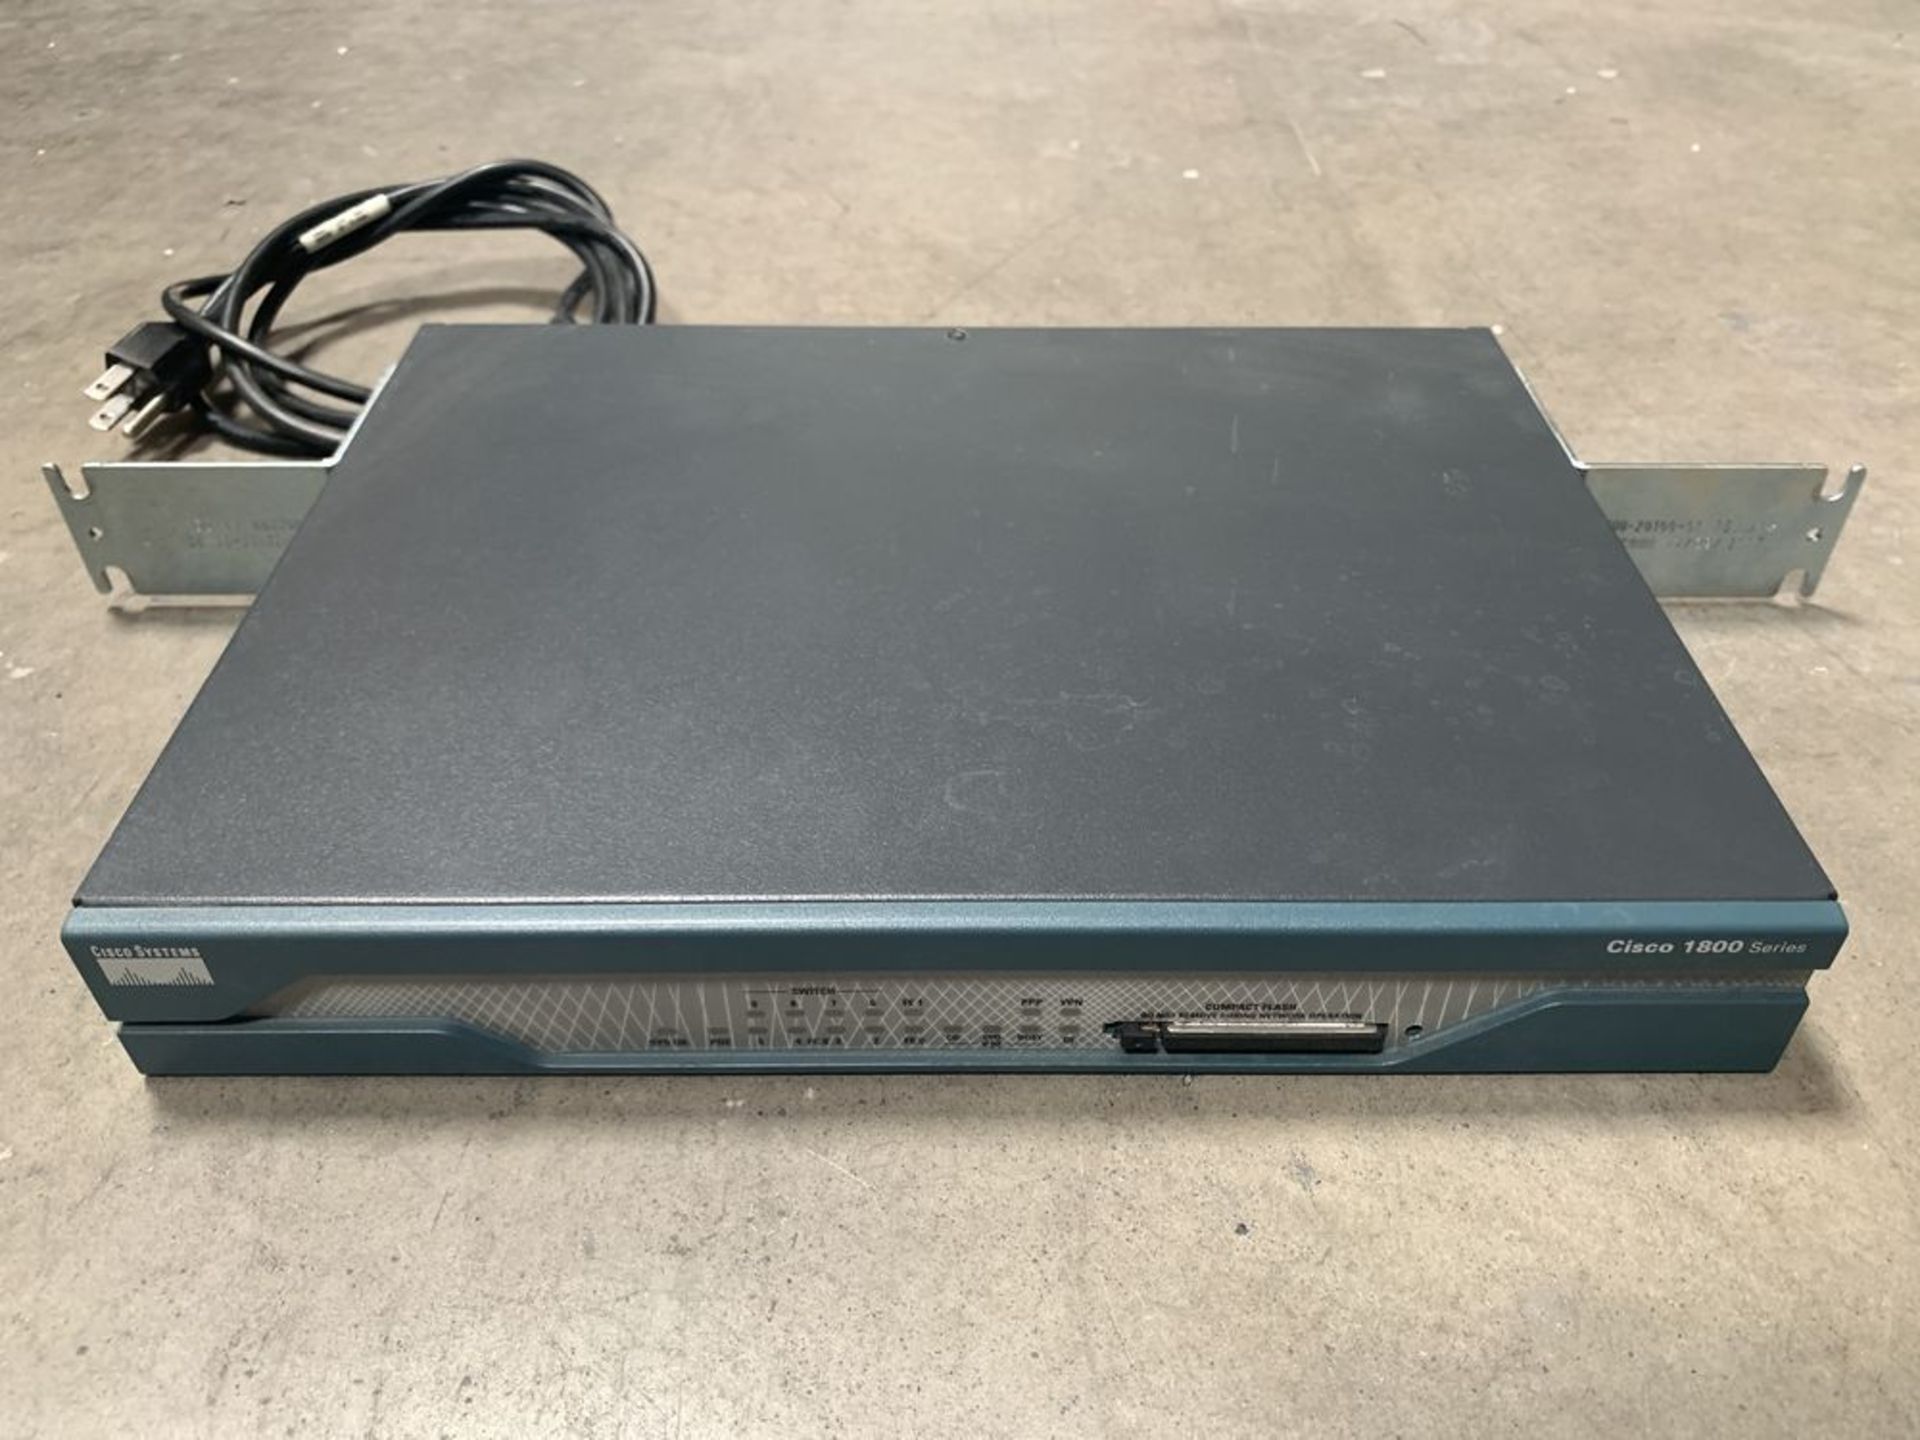 Cisco Systems 1800 Series Integrated Services Router 341-0135-02, with Brackets and Power